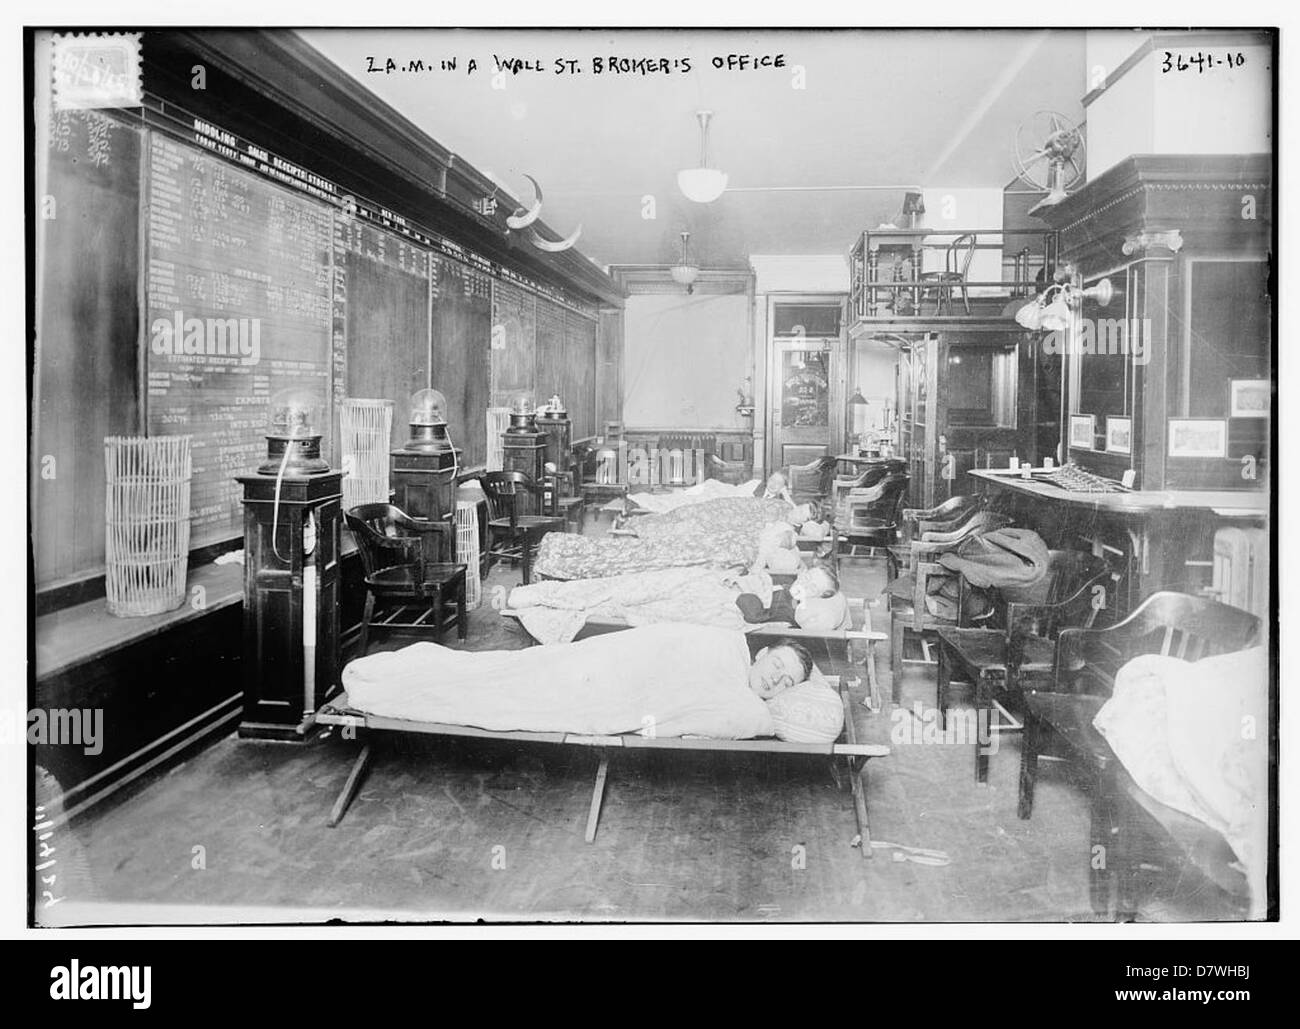 Z.A. M. in a Wall St. broker's office (LOC) Stock Photo